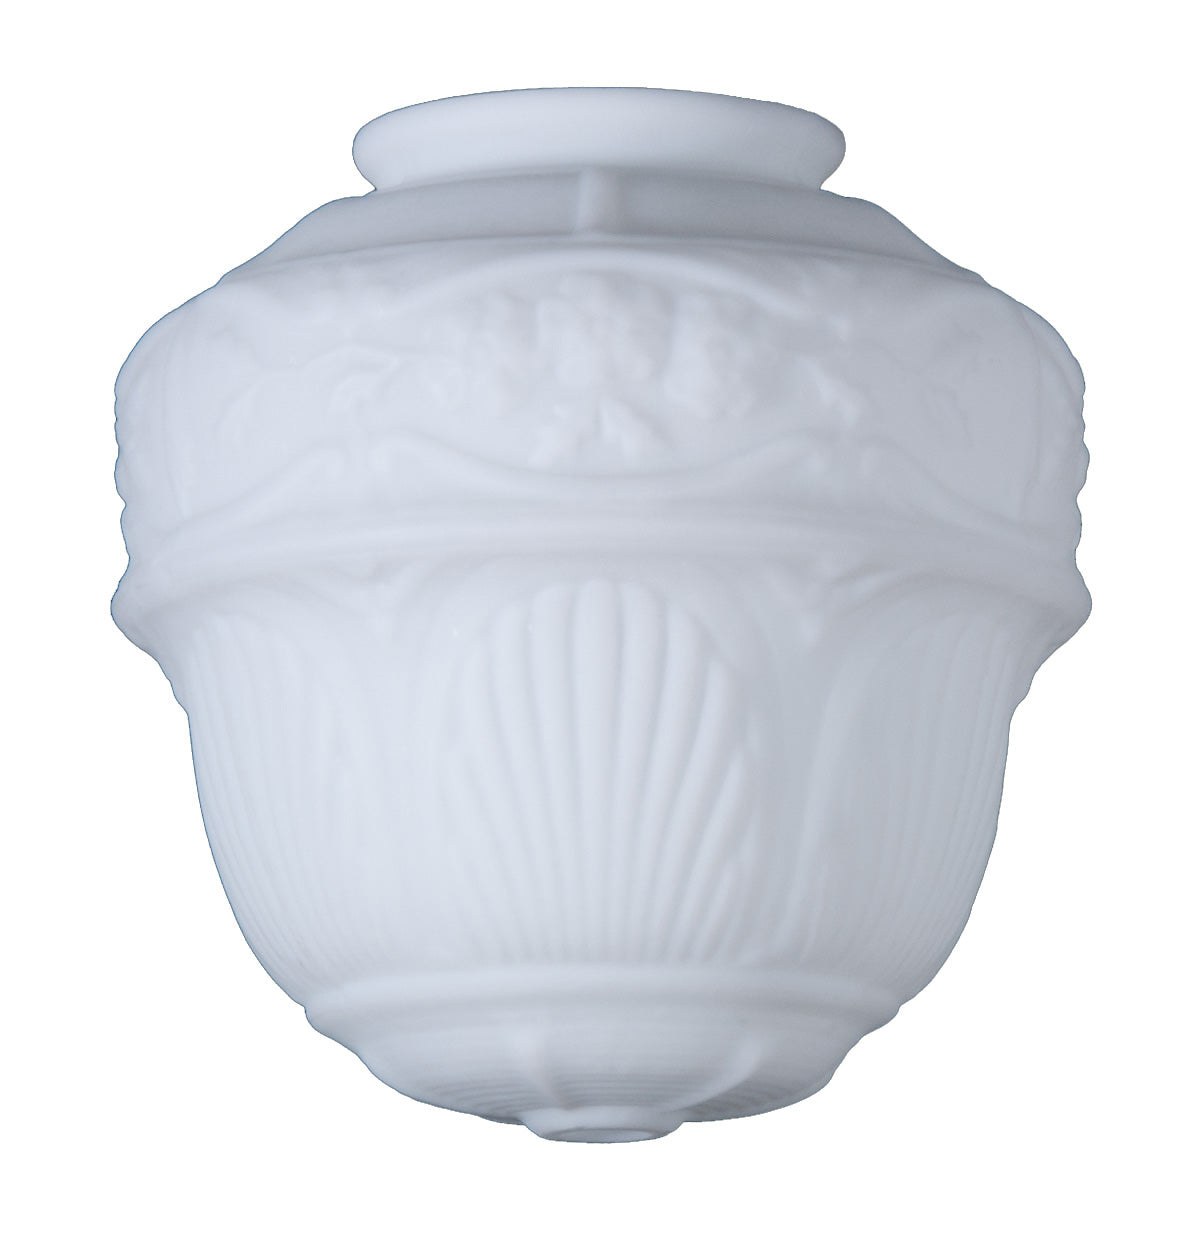 8-1/2 inch tall Satin Opal Glass Embossed Hall Light Shade, 4 inch lip fitter